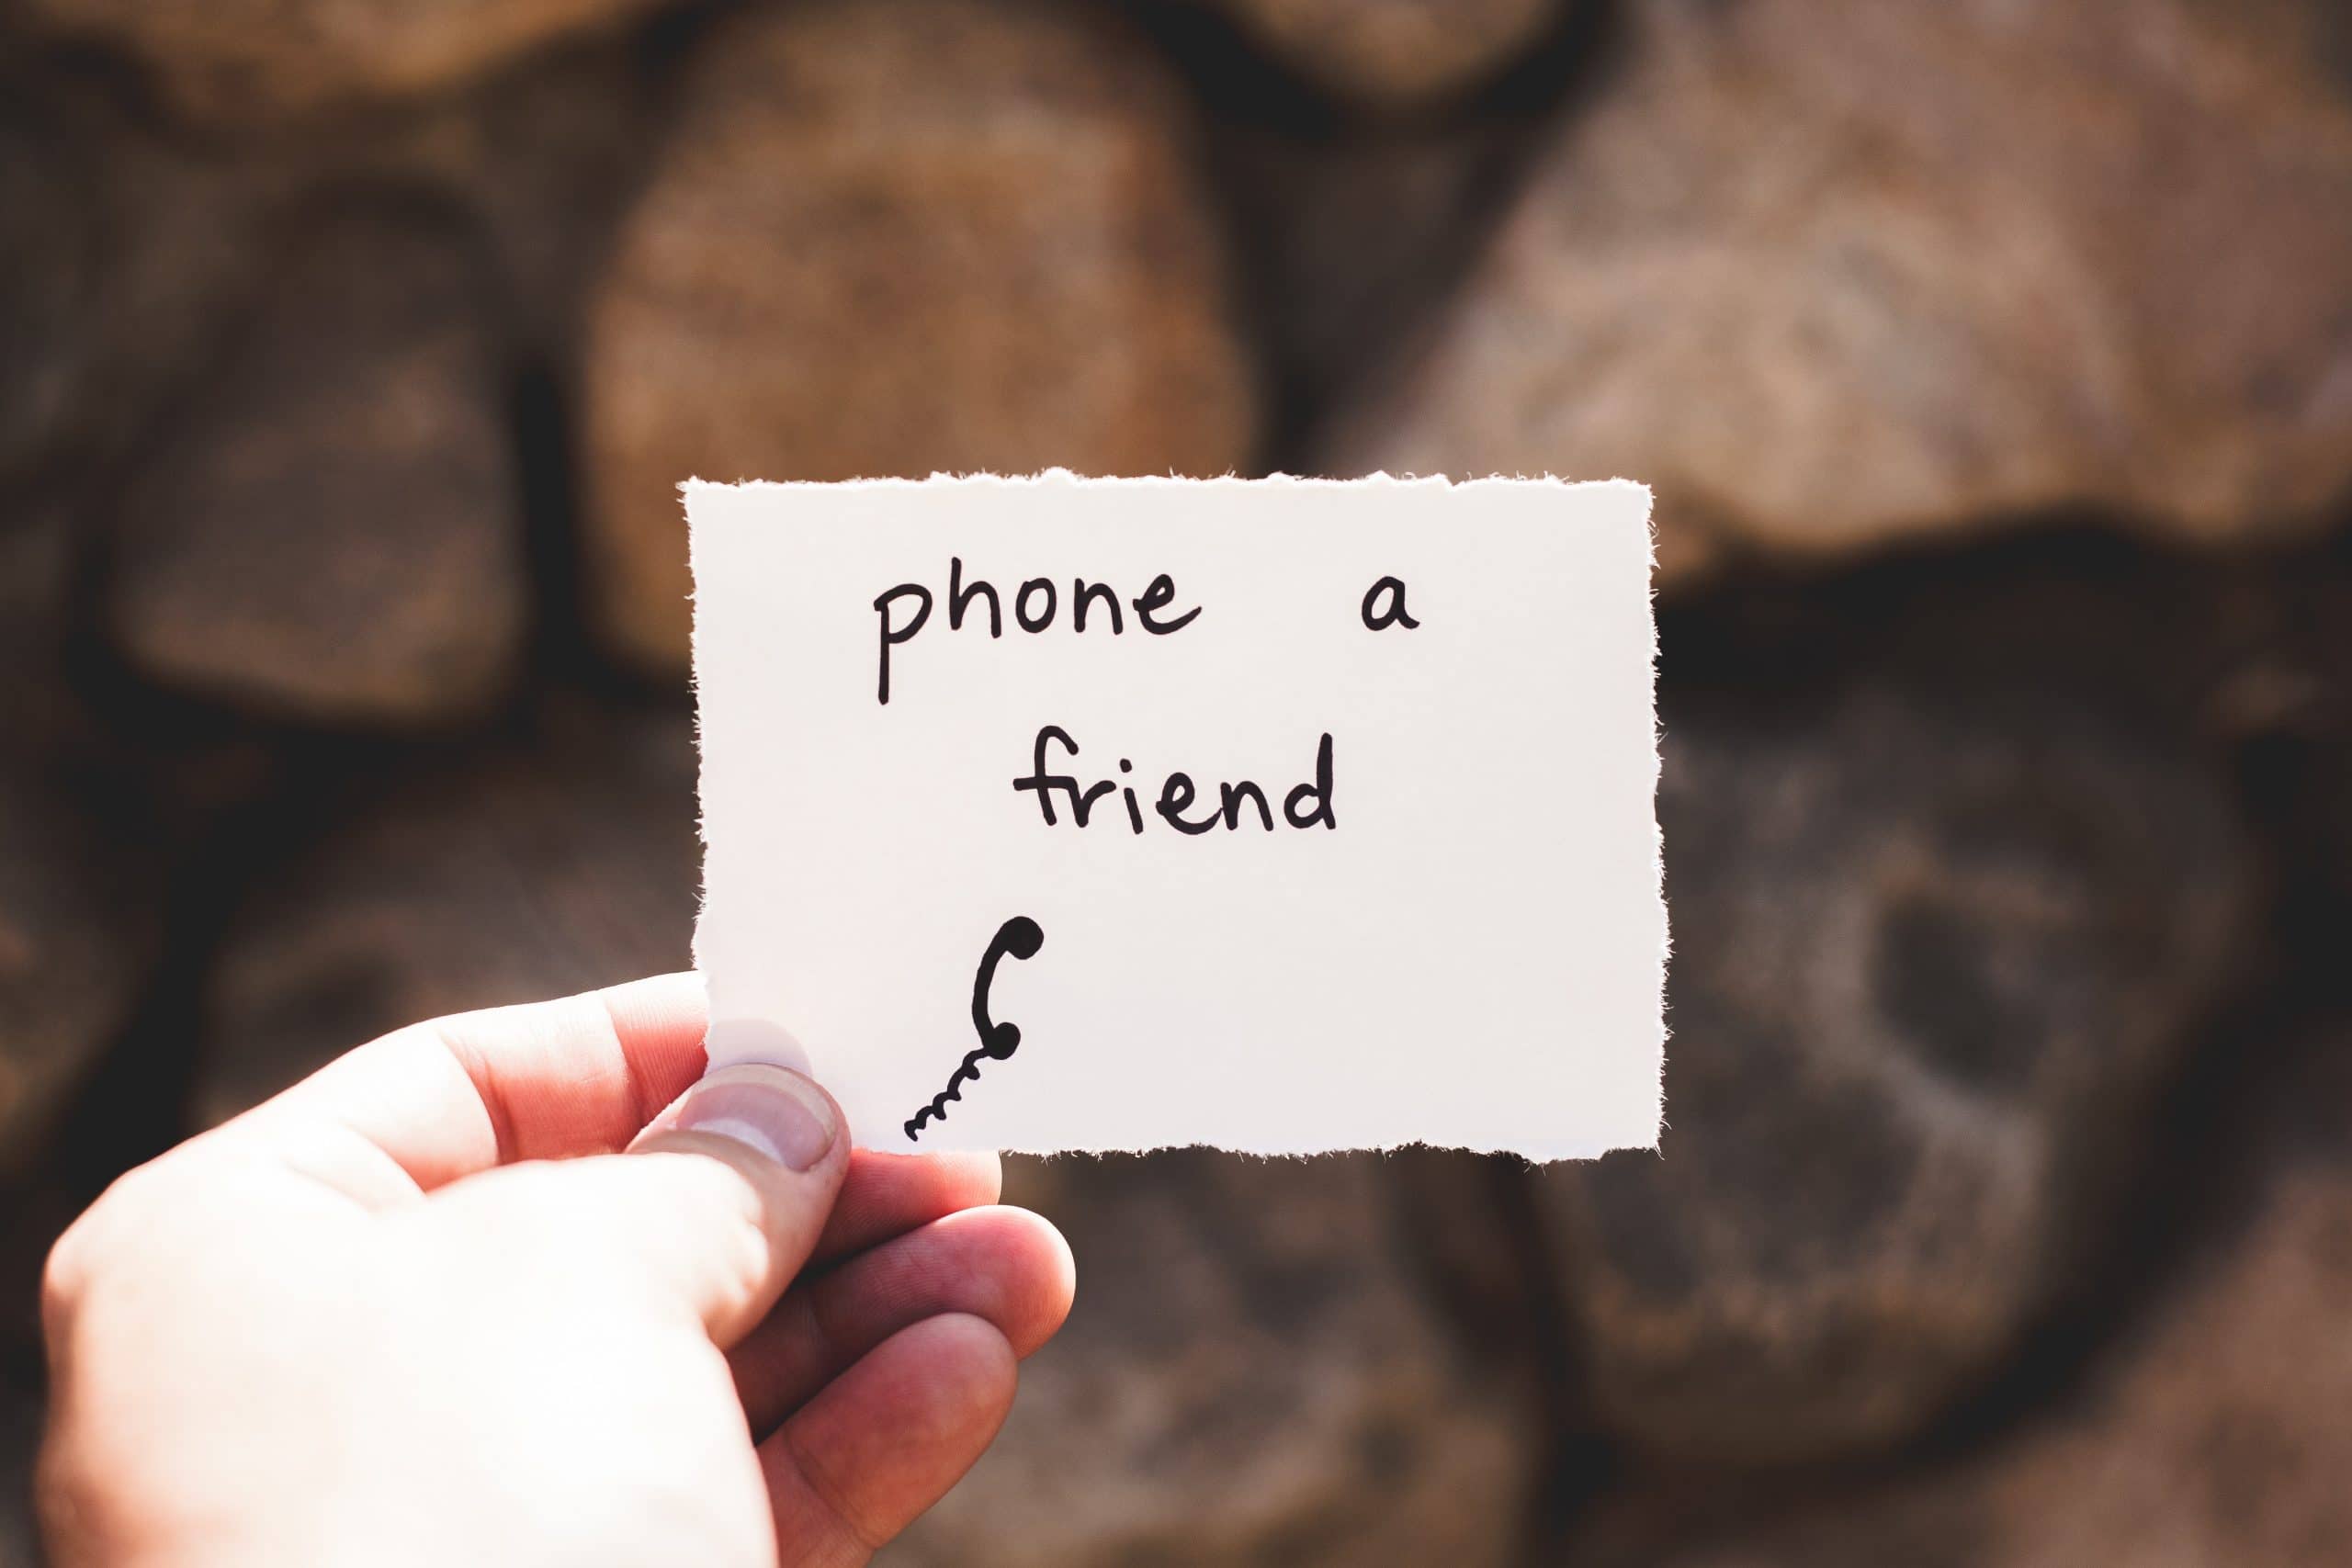 Person holding piece of paper with “phone a friend” written on it